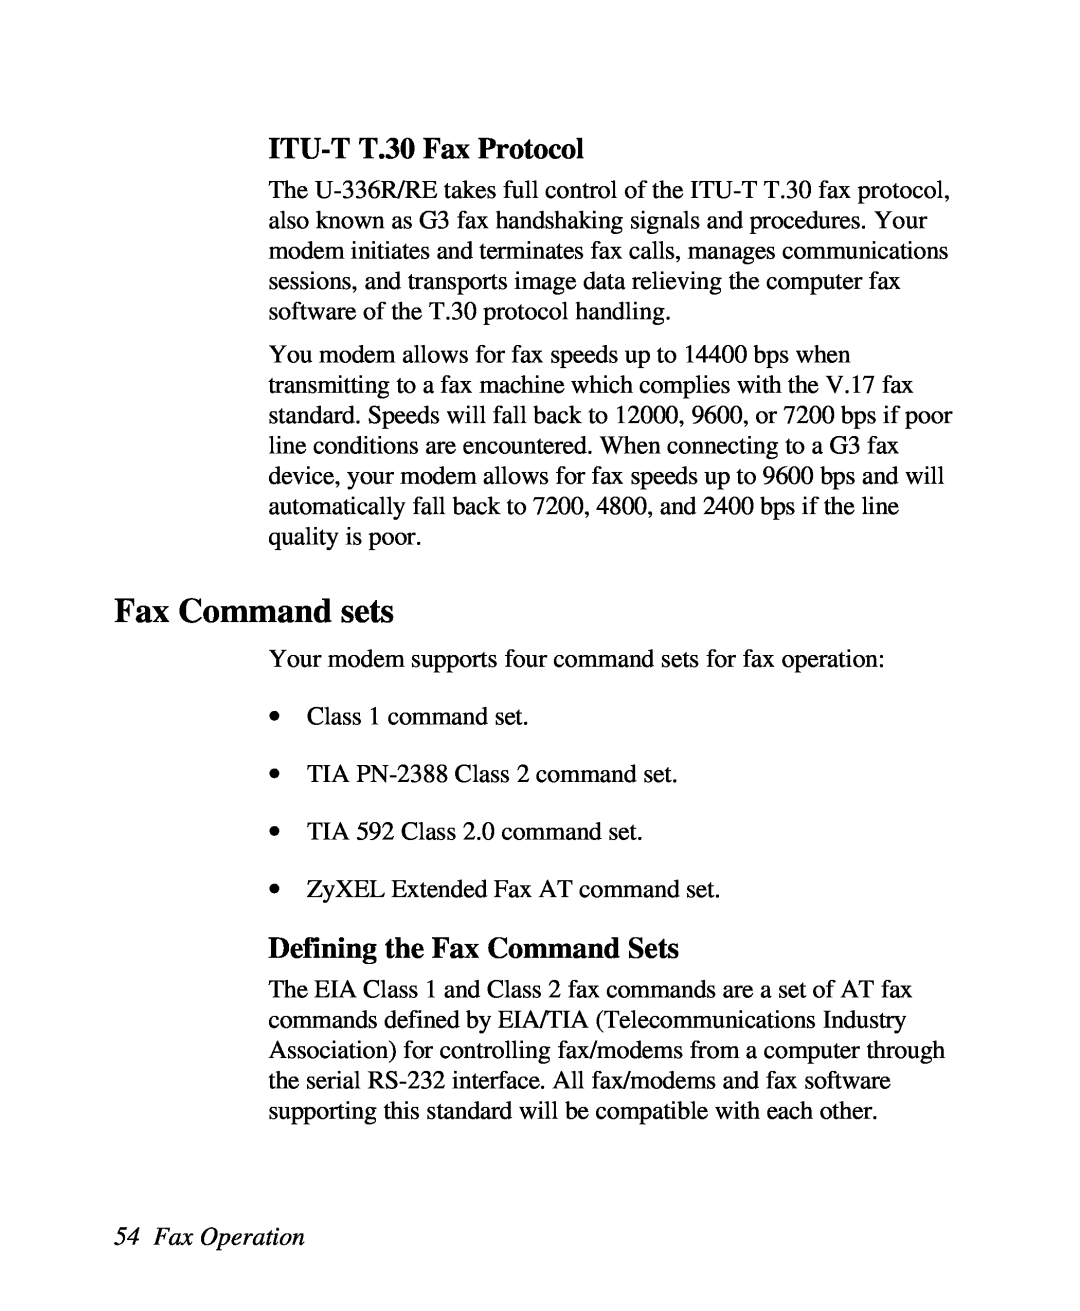 ZyXEL Communications U-336R/RE Fax Command sets, ITU-T T.30 Fax Protocol, Defining the Fax Command Sets, Fax Operation 